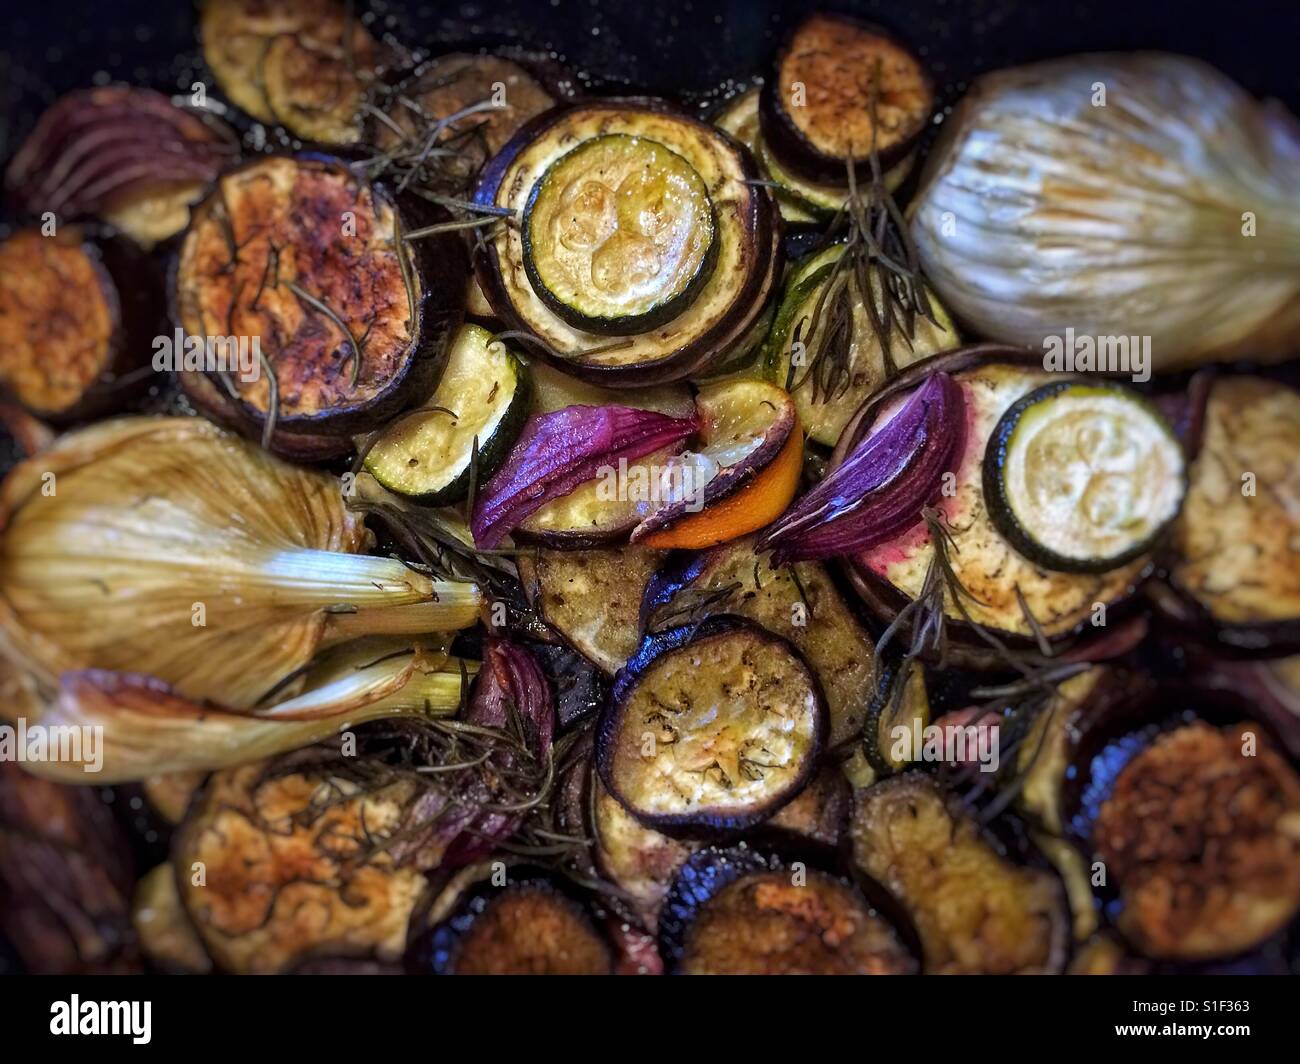 Roasted vegetables Stock Photo